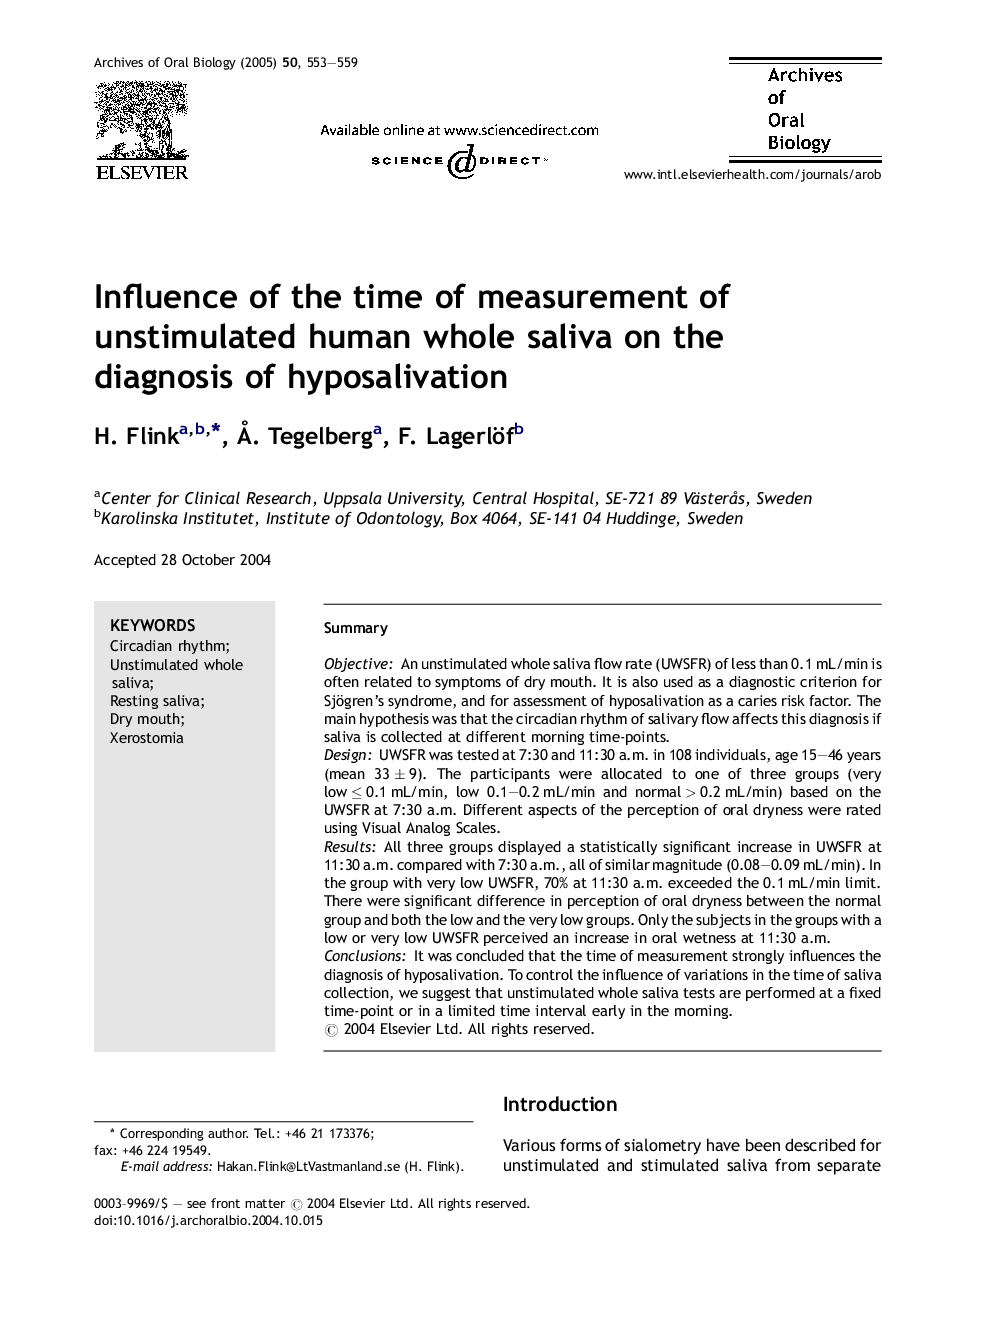 Influence of the time of measurement of unstimulated human whole saliva on the diagnosis of hyposalivation